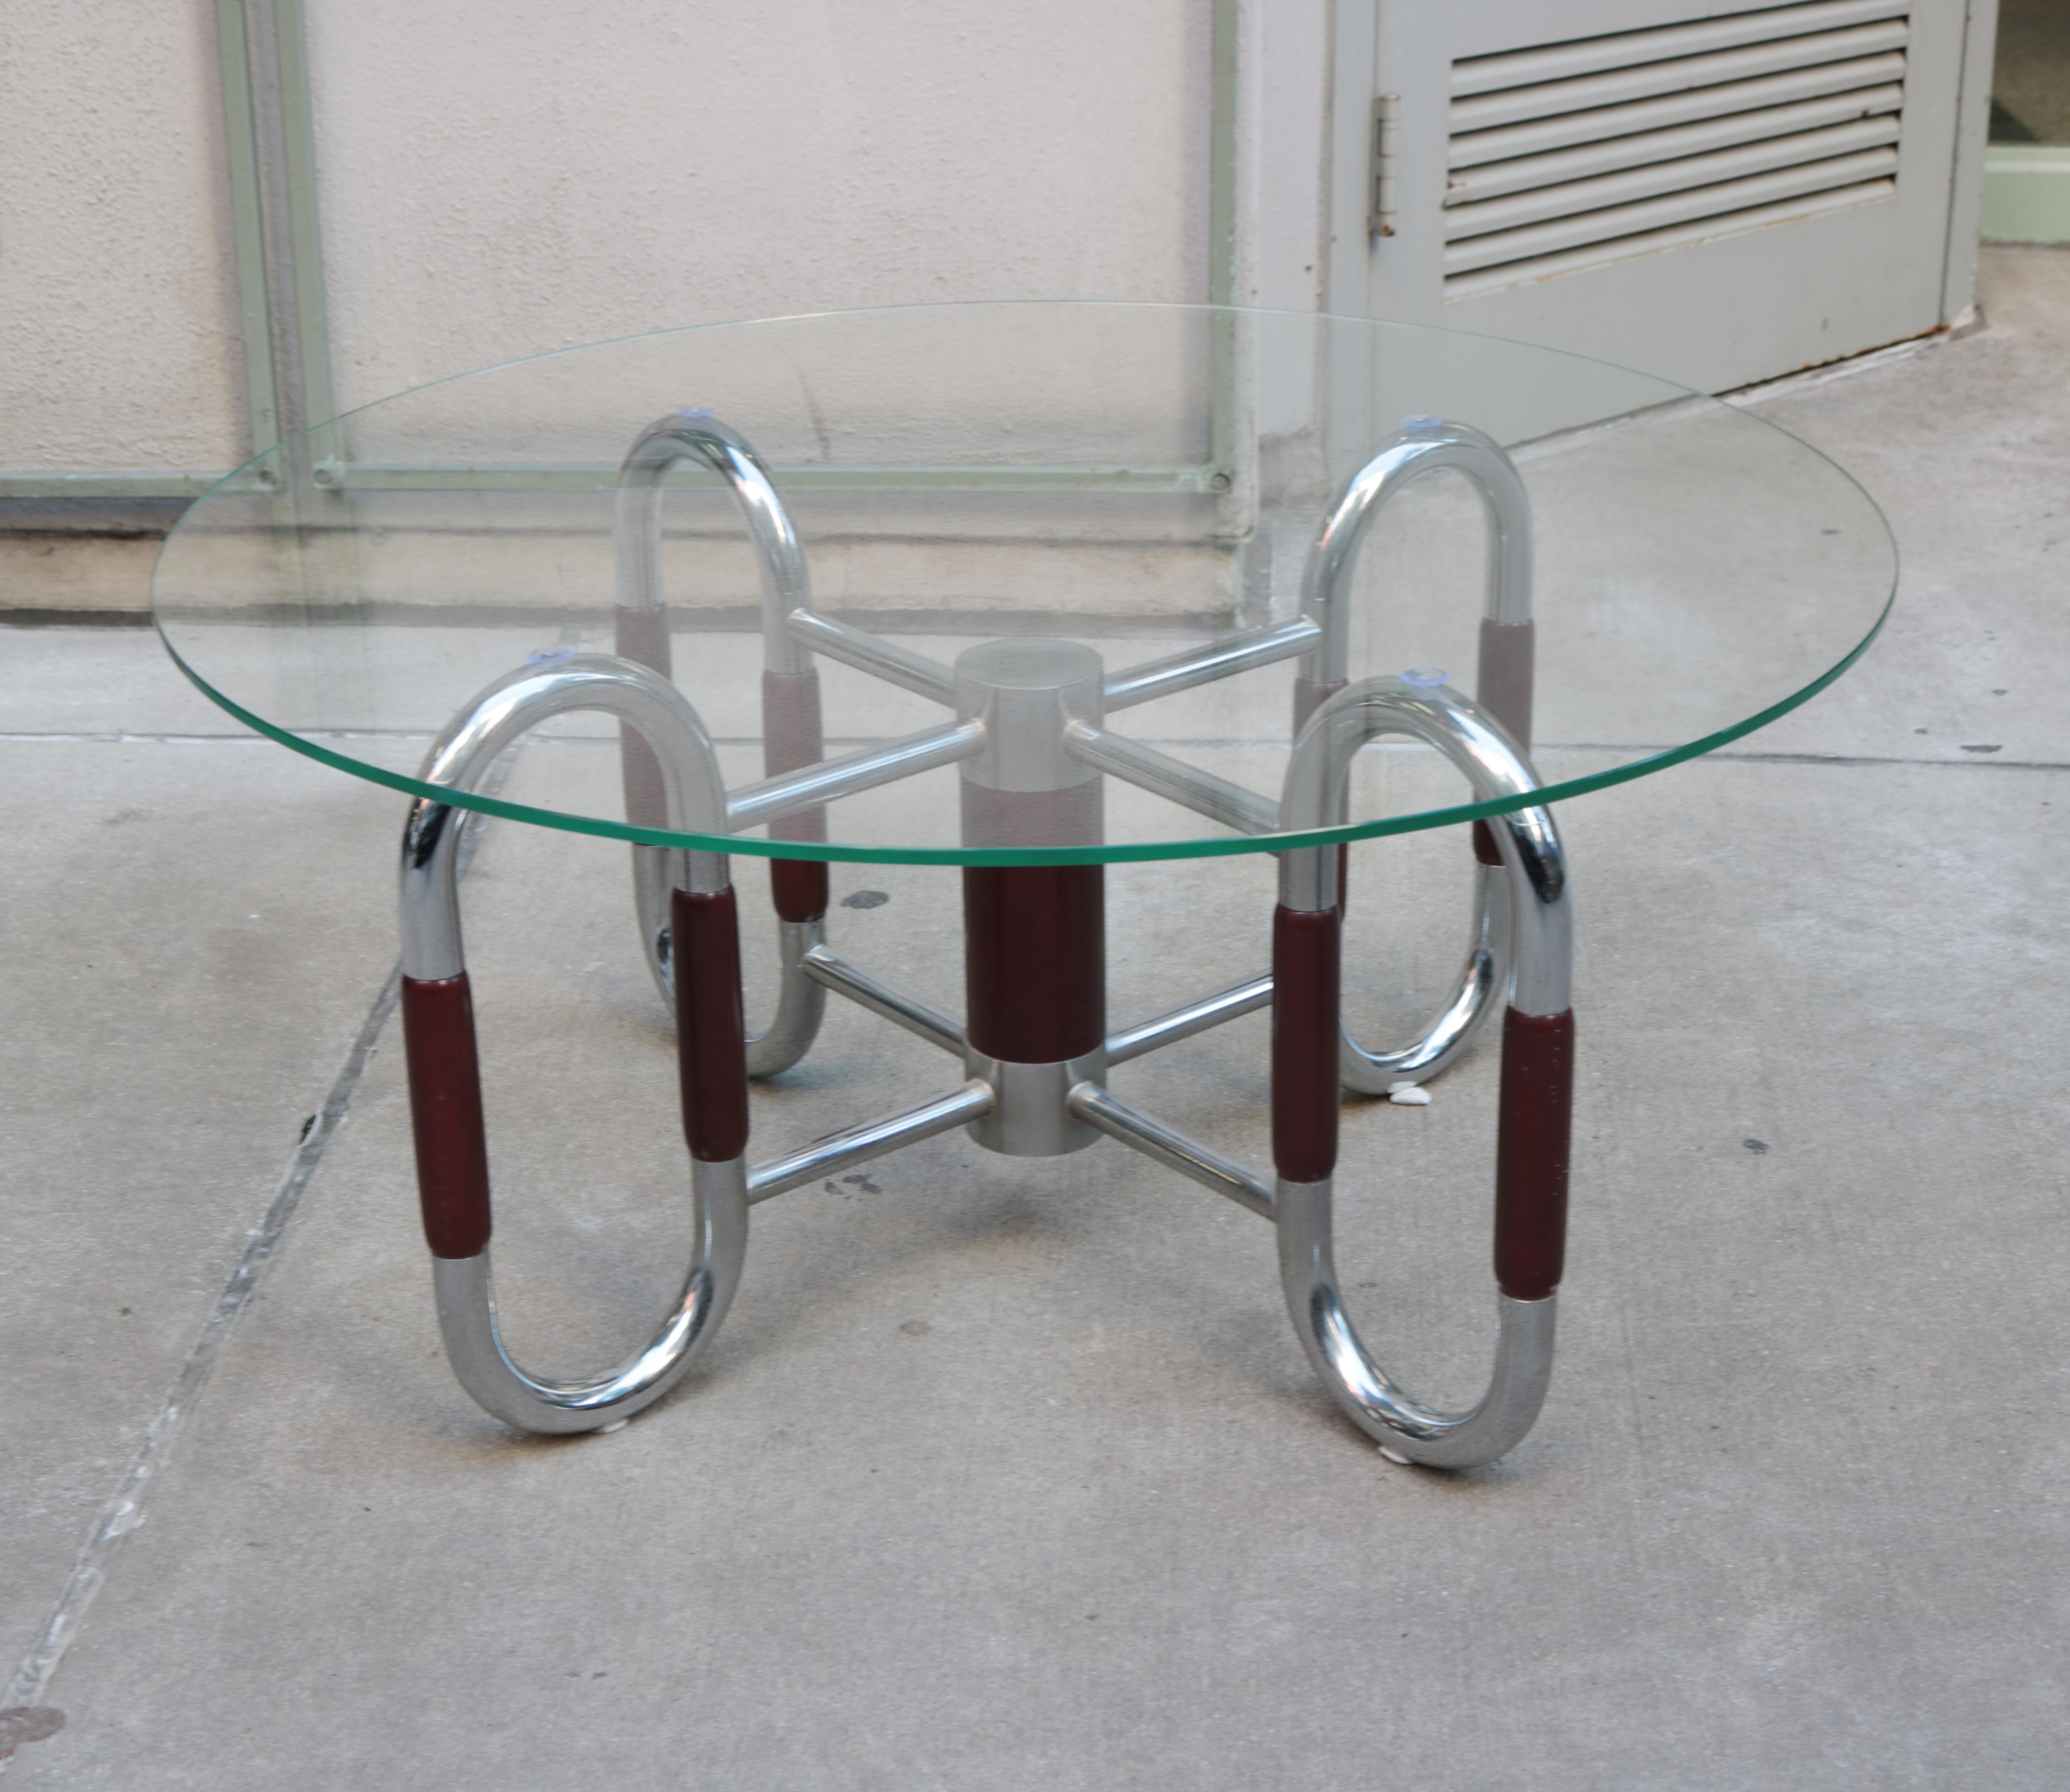 Gabatti e Isola round cocktail table. 
Chrome plated steel, mahogany and glass top.